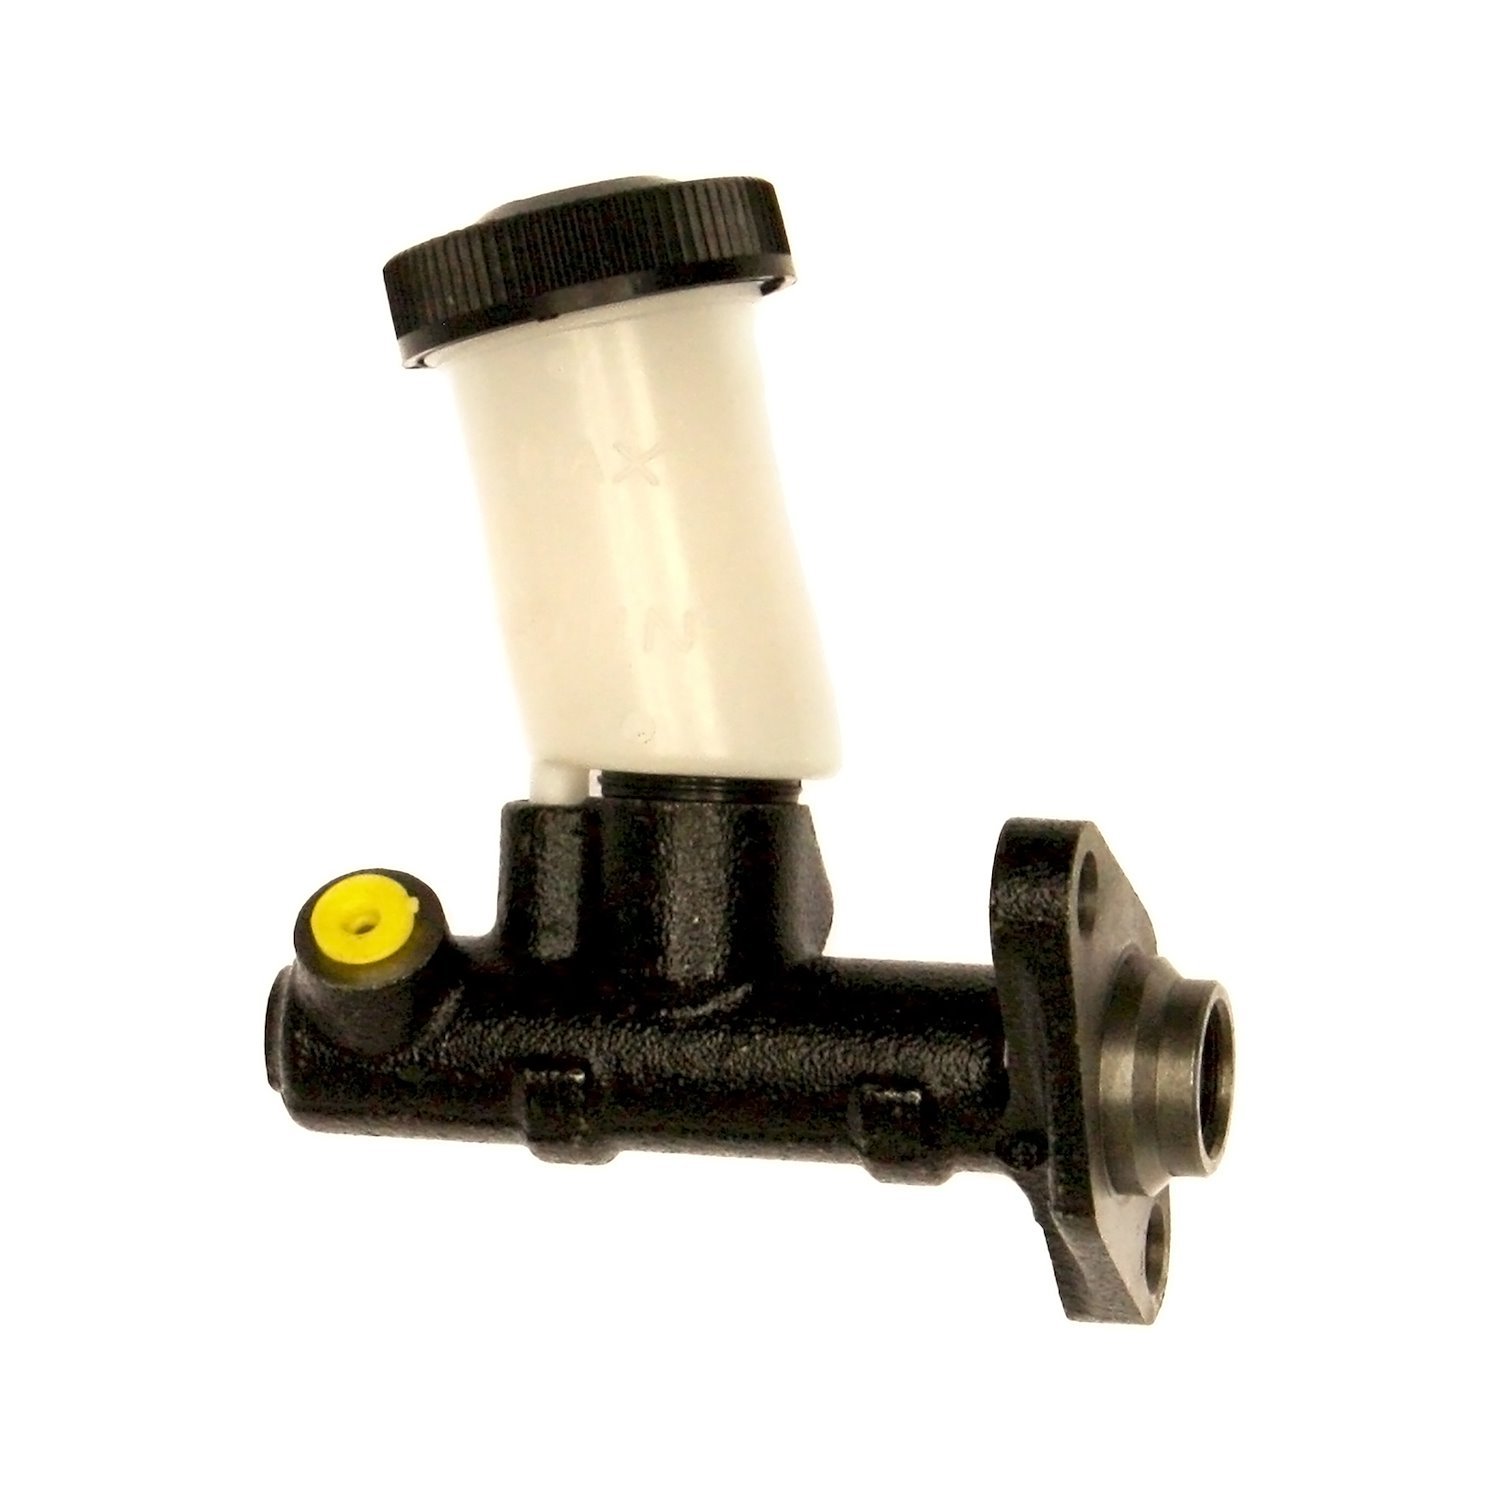 MC229 OEM Replacement Clutch Master Cylinder, 1990-2005 Mazda